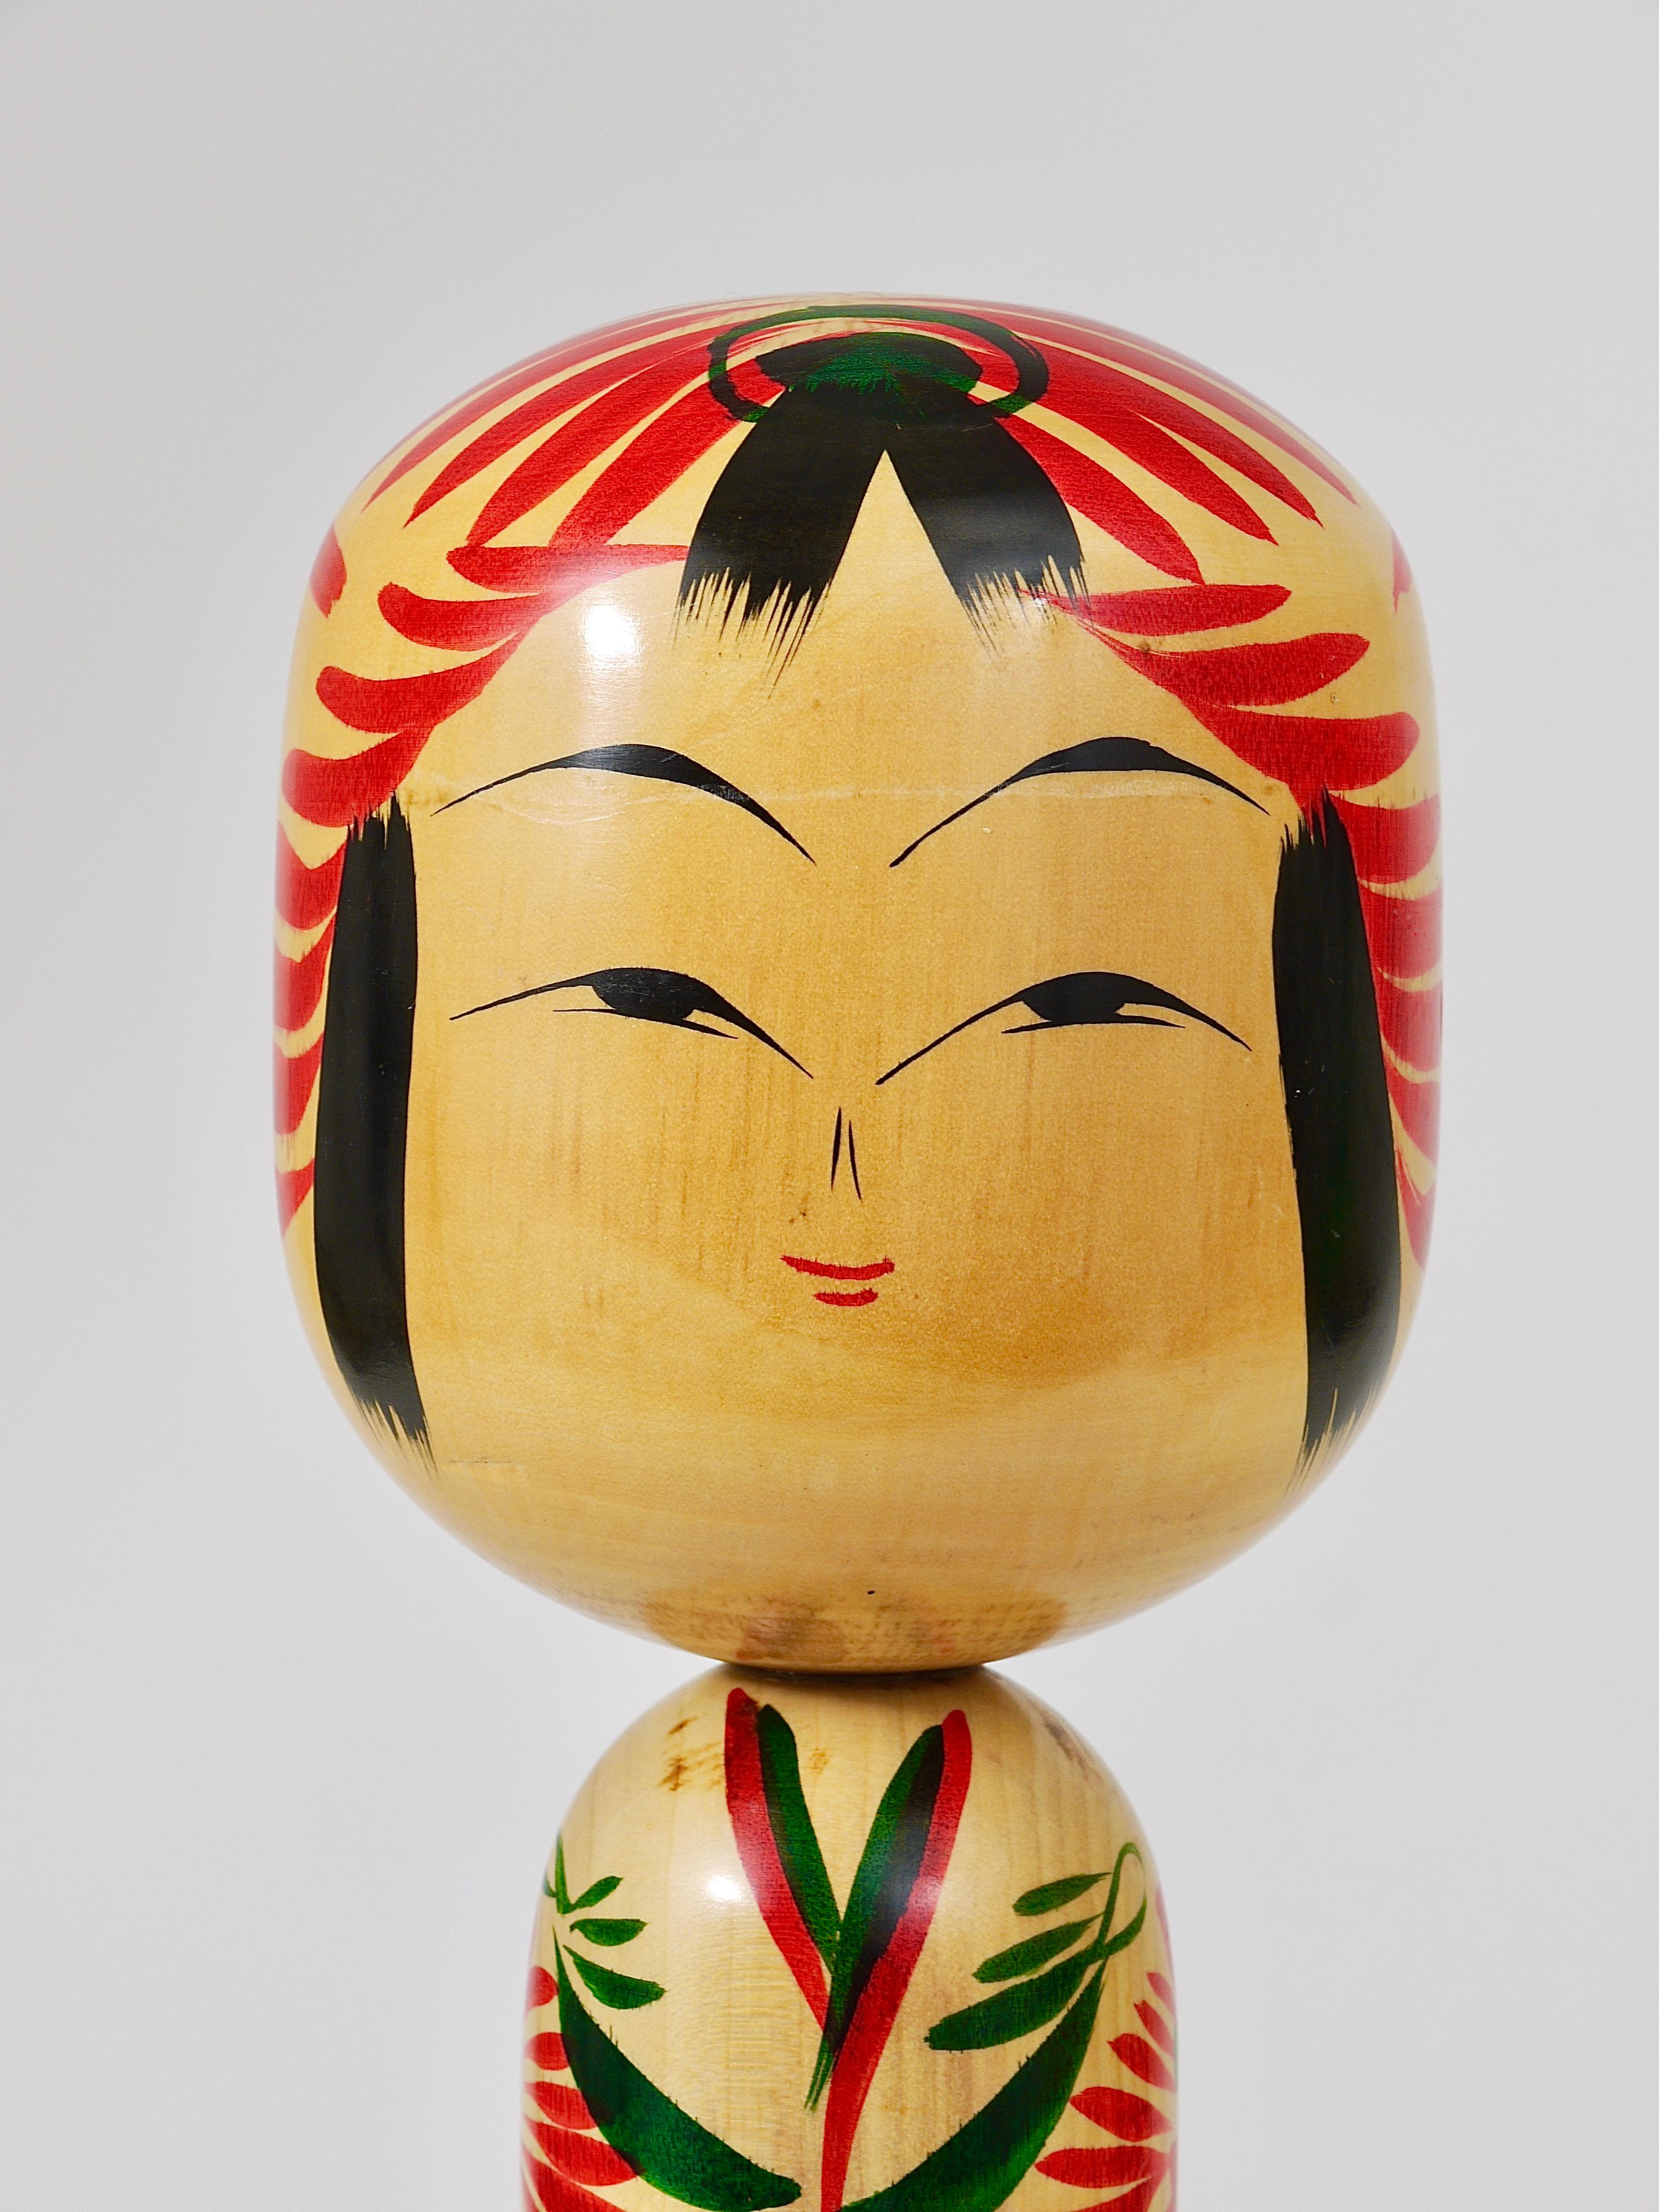 Edo Decorative Kokeshi Doll Sculpture from Northern Japan, Hand-Painted, Signed For Sale